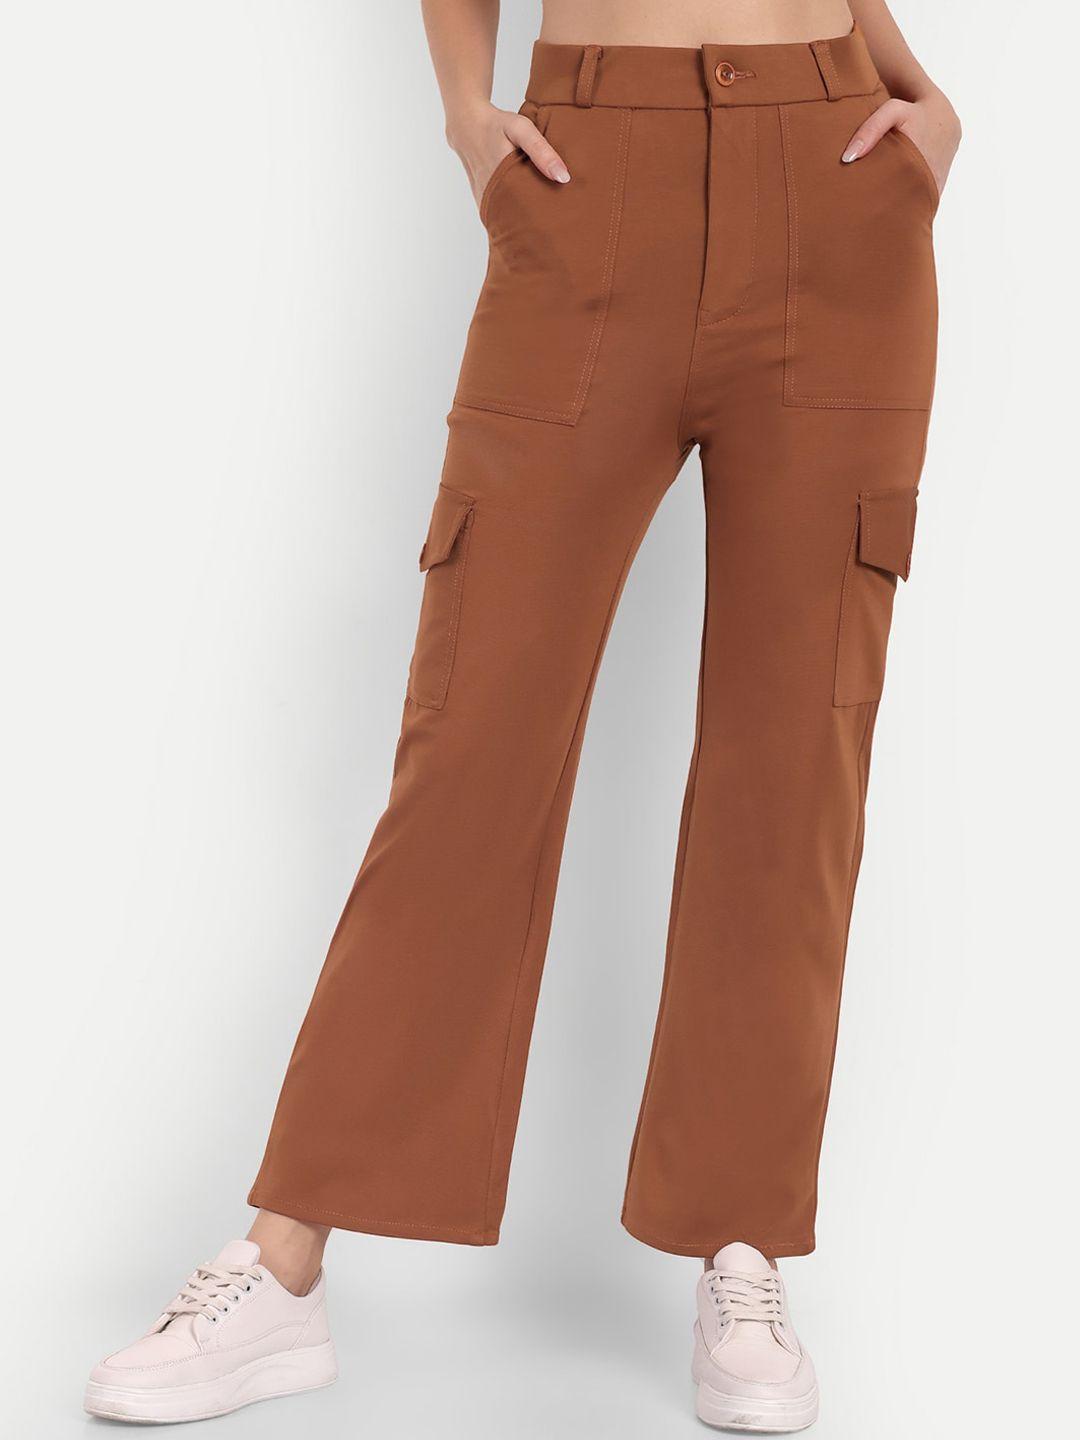 next-one-women-smart-straight-fit-high-rise-easy-wash-cargos-trousers